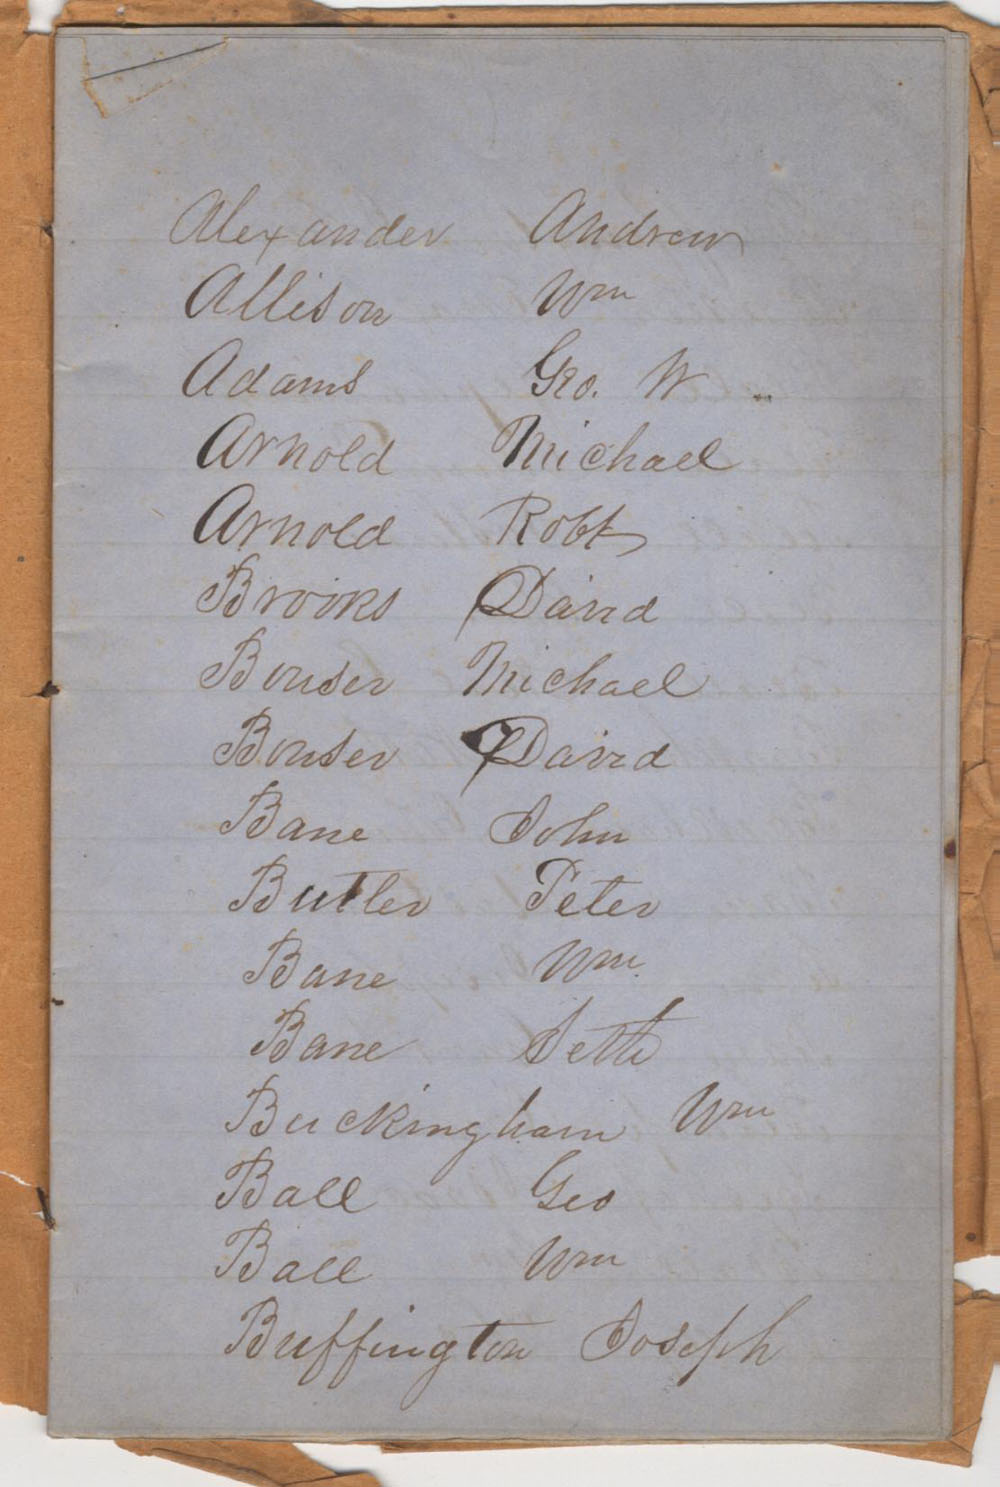 voters list page 1